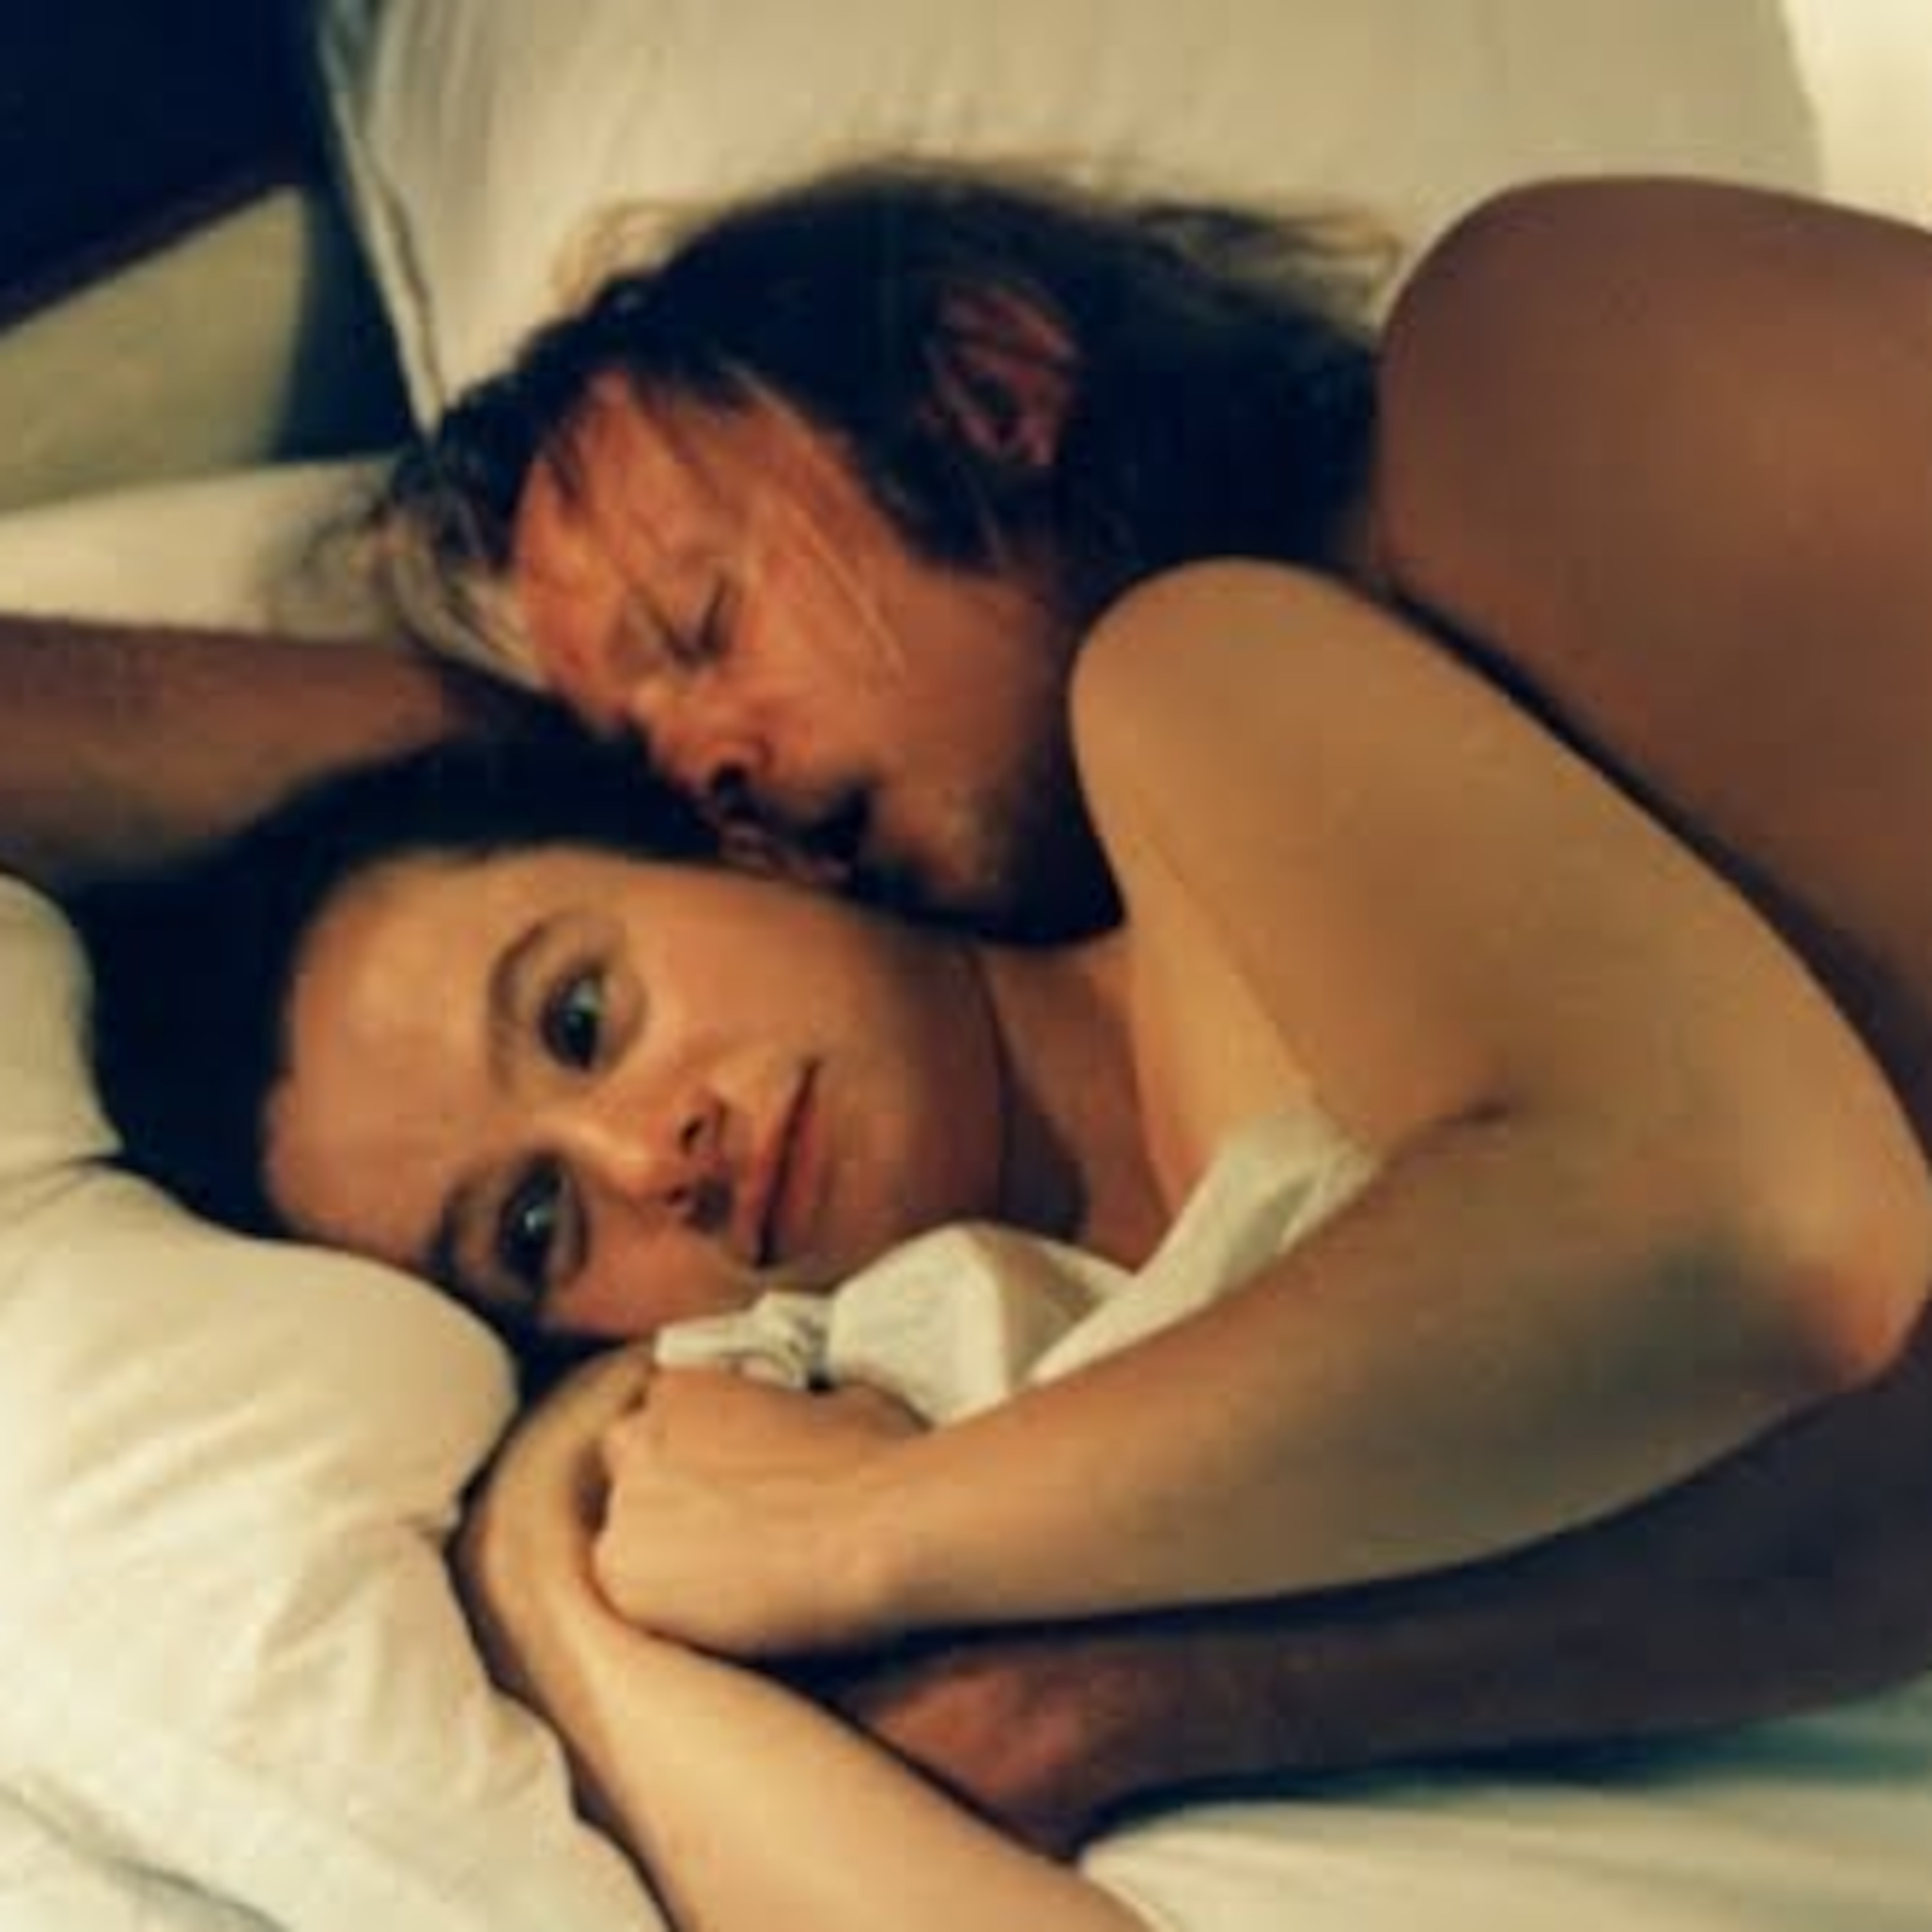 Emily Watson's Film Education In Sex, Politics And Religion